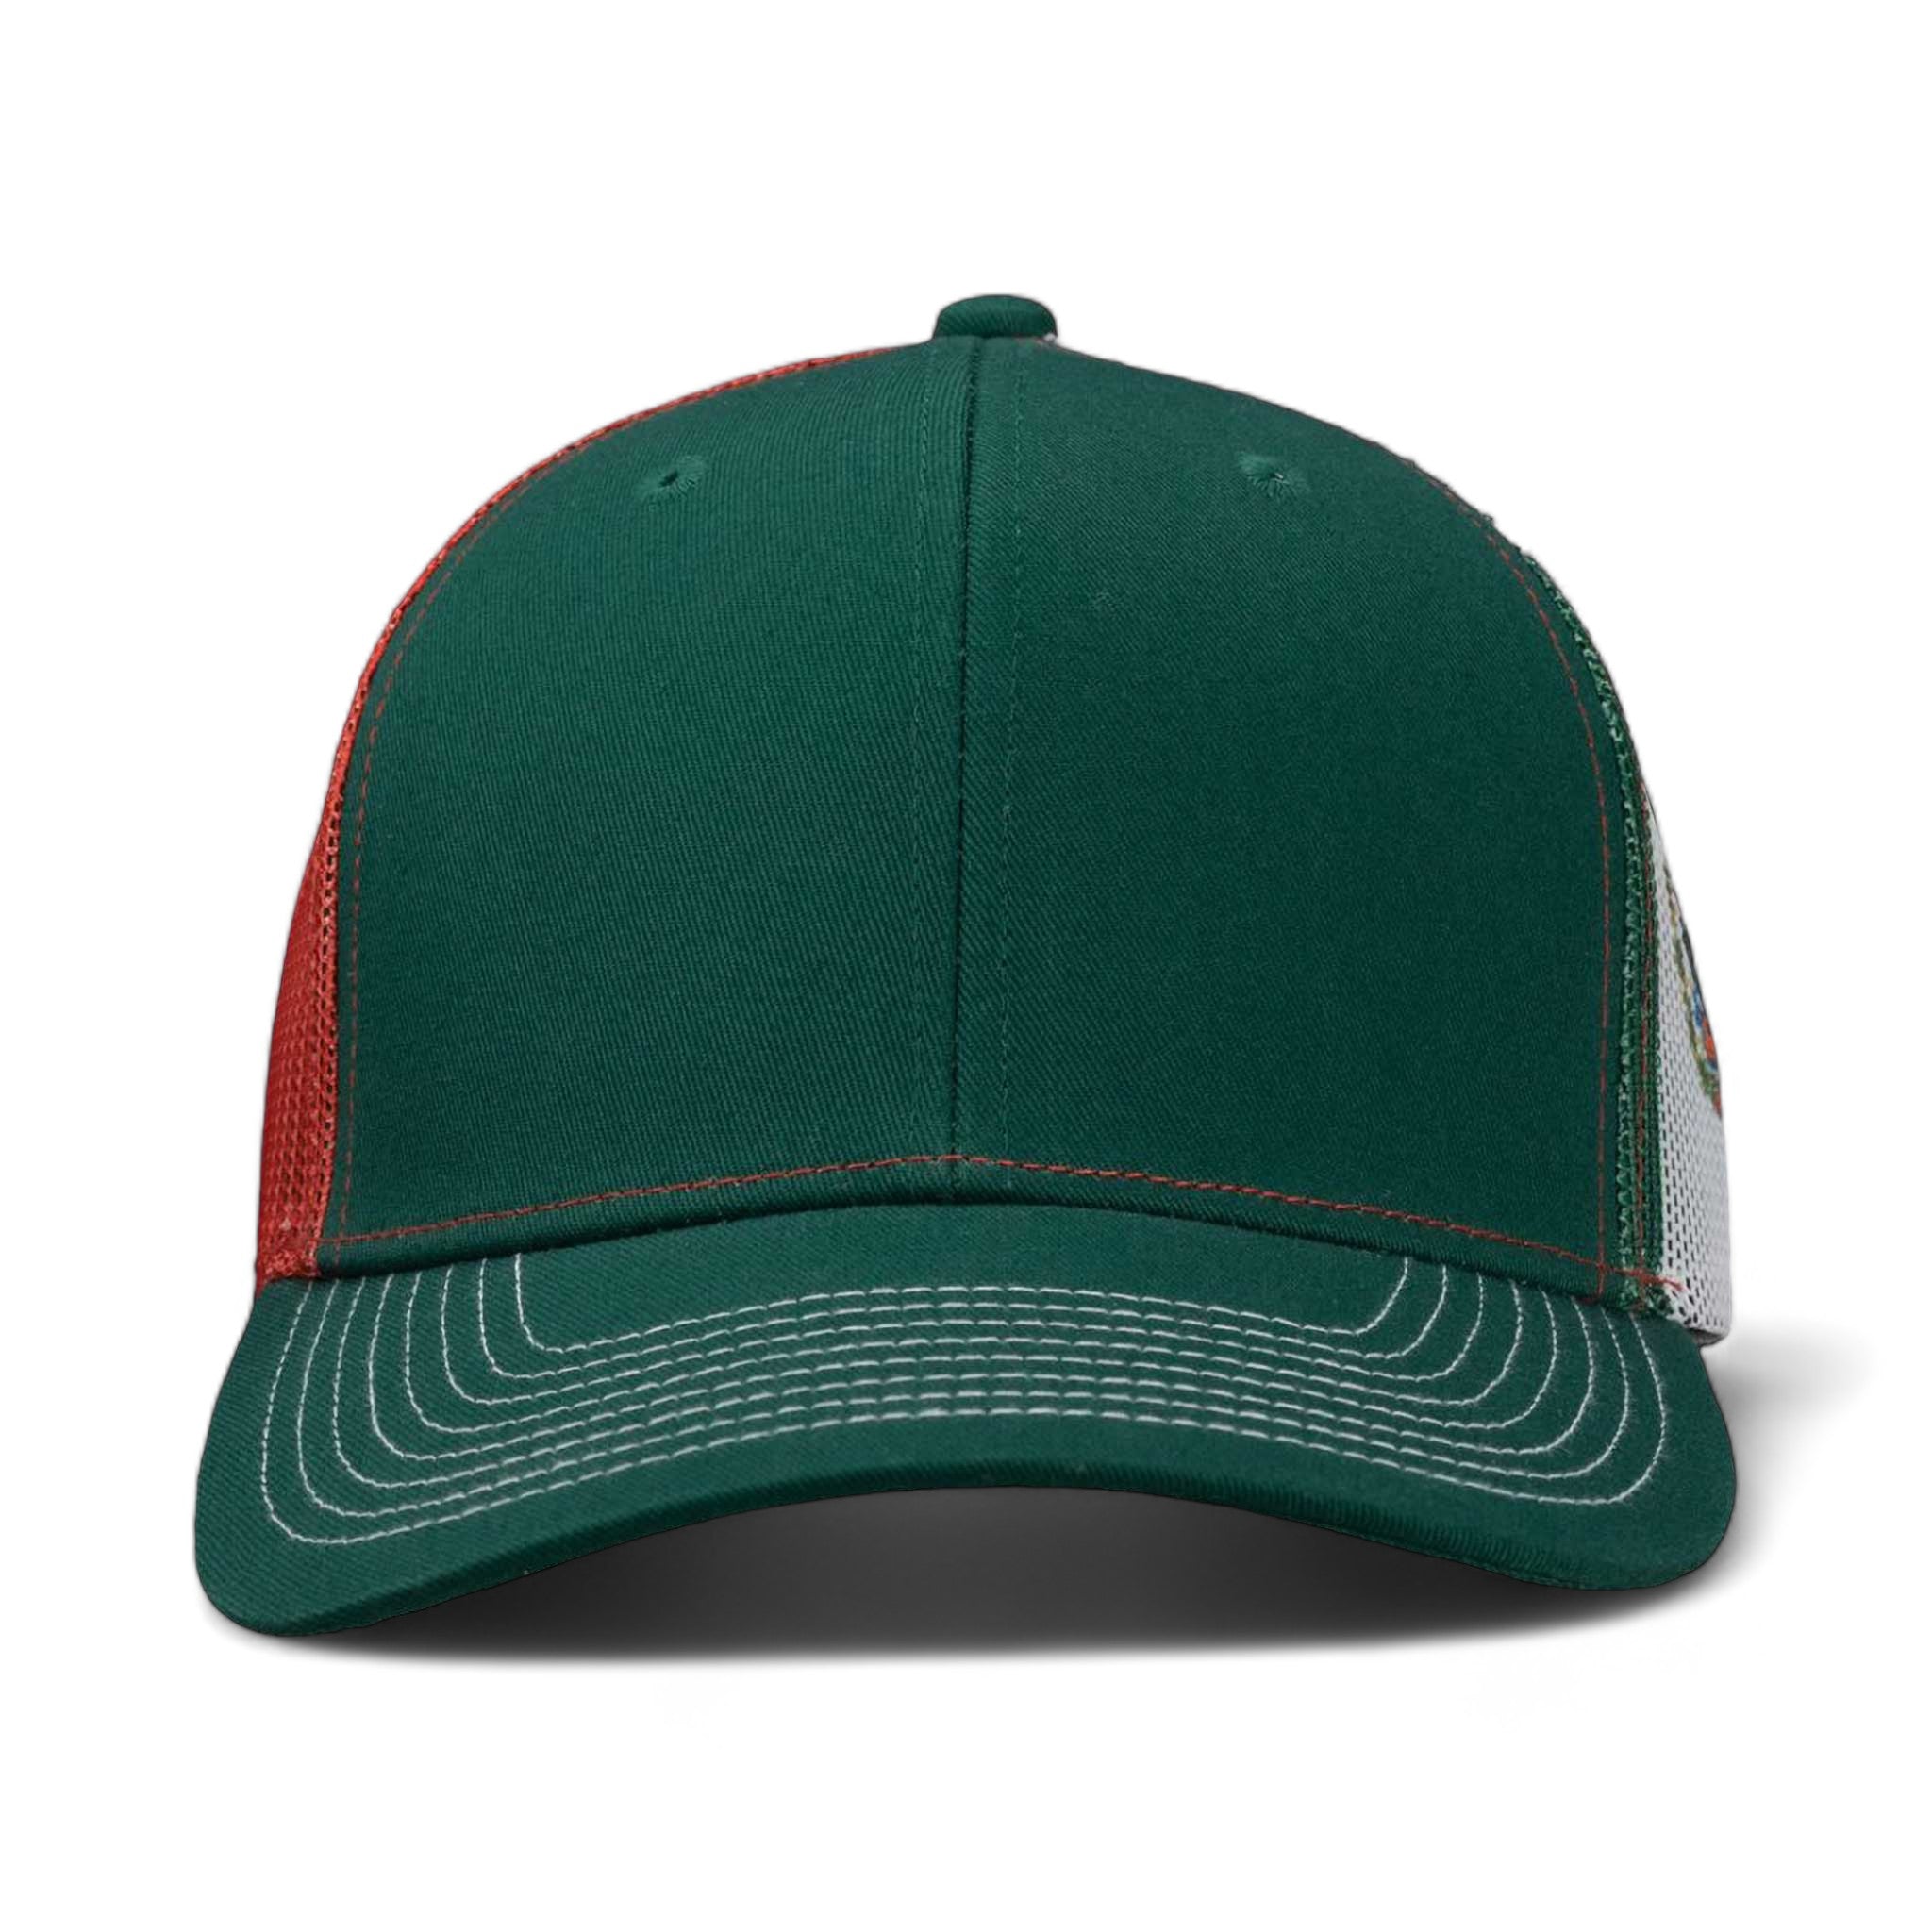 Front view of Kati S700M custom hat in dark green, red and mexico flag